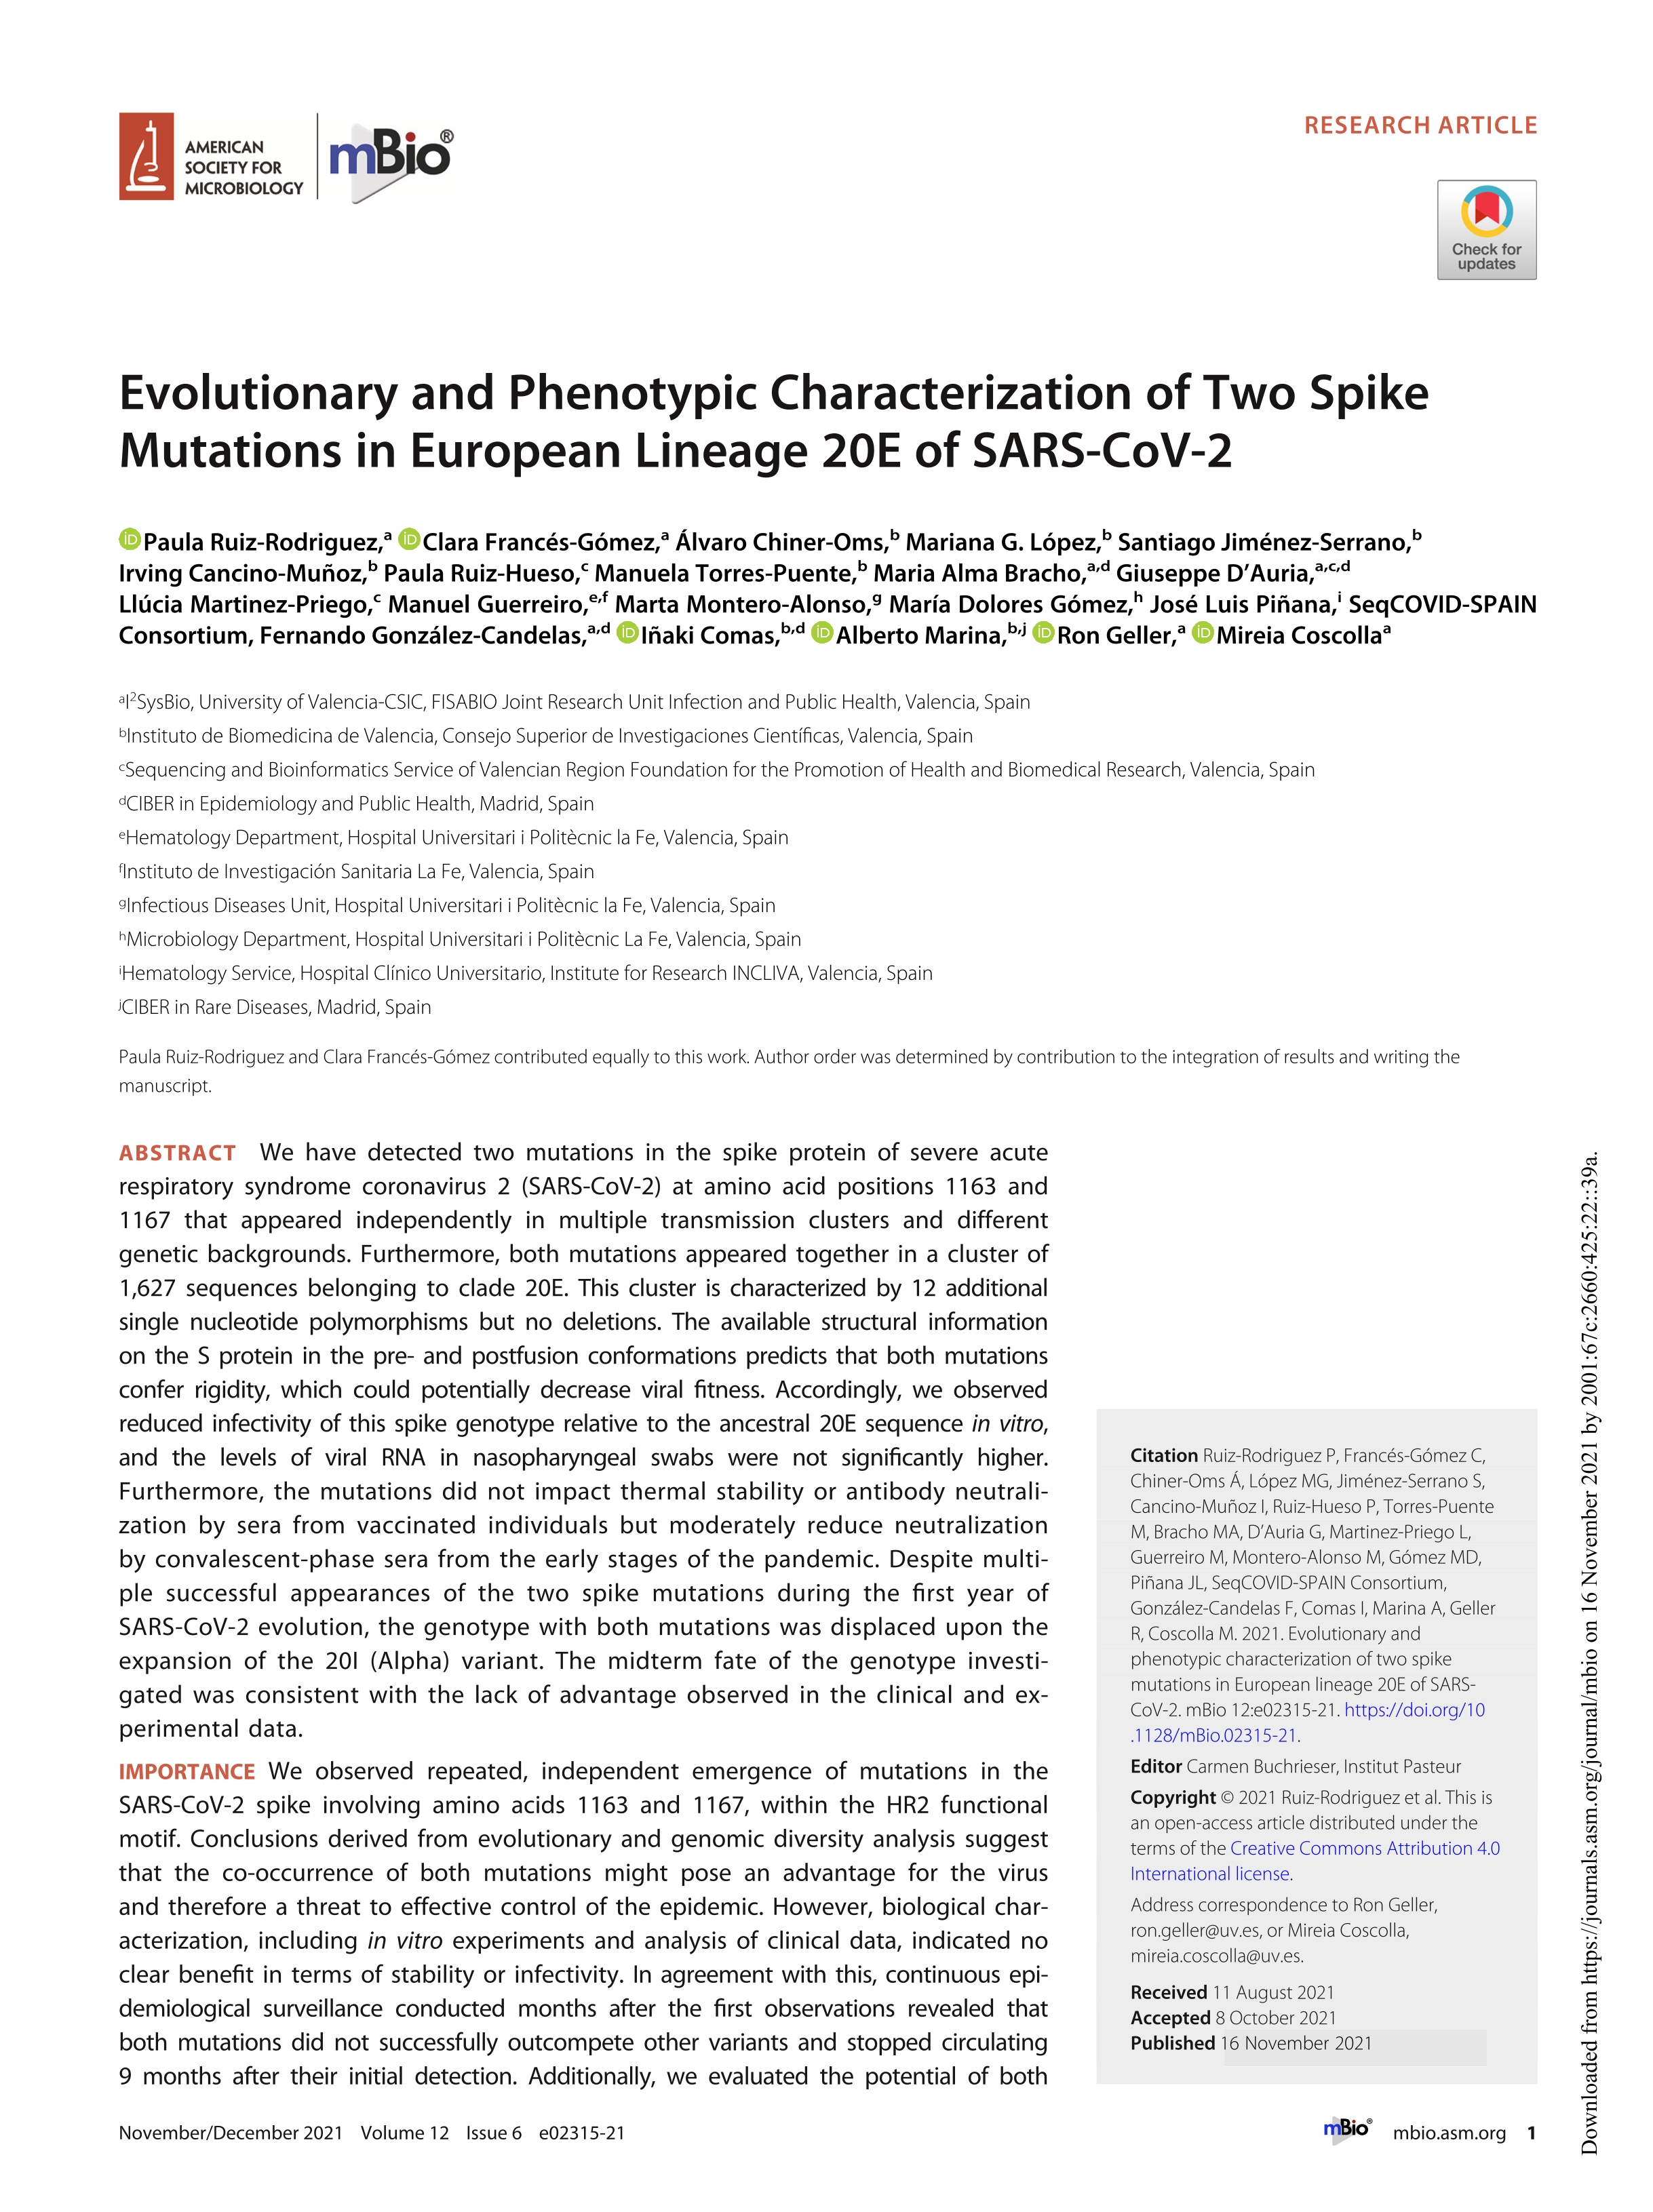 Evolutionary and phenotypic characterization of two spike mutations in European lineage 20E of SARS-CoV-2.